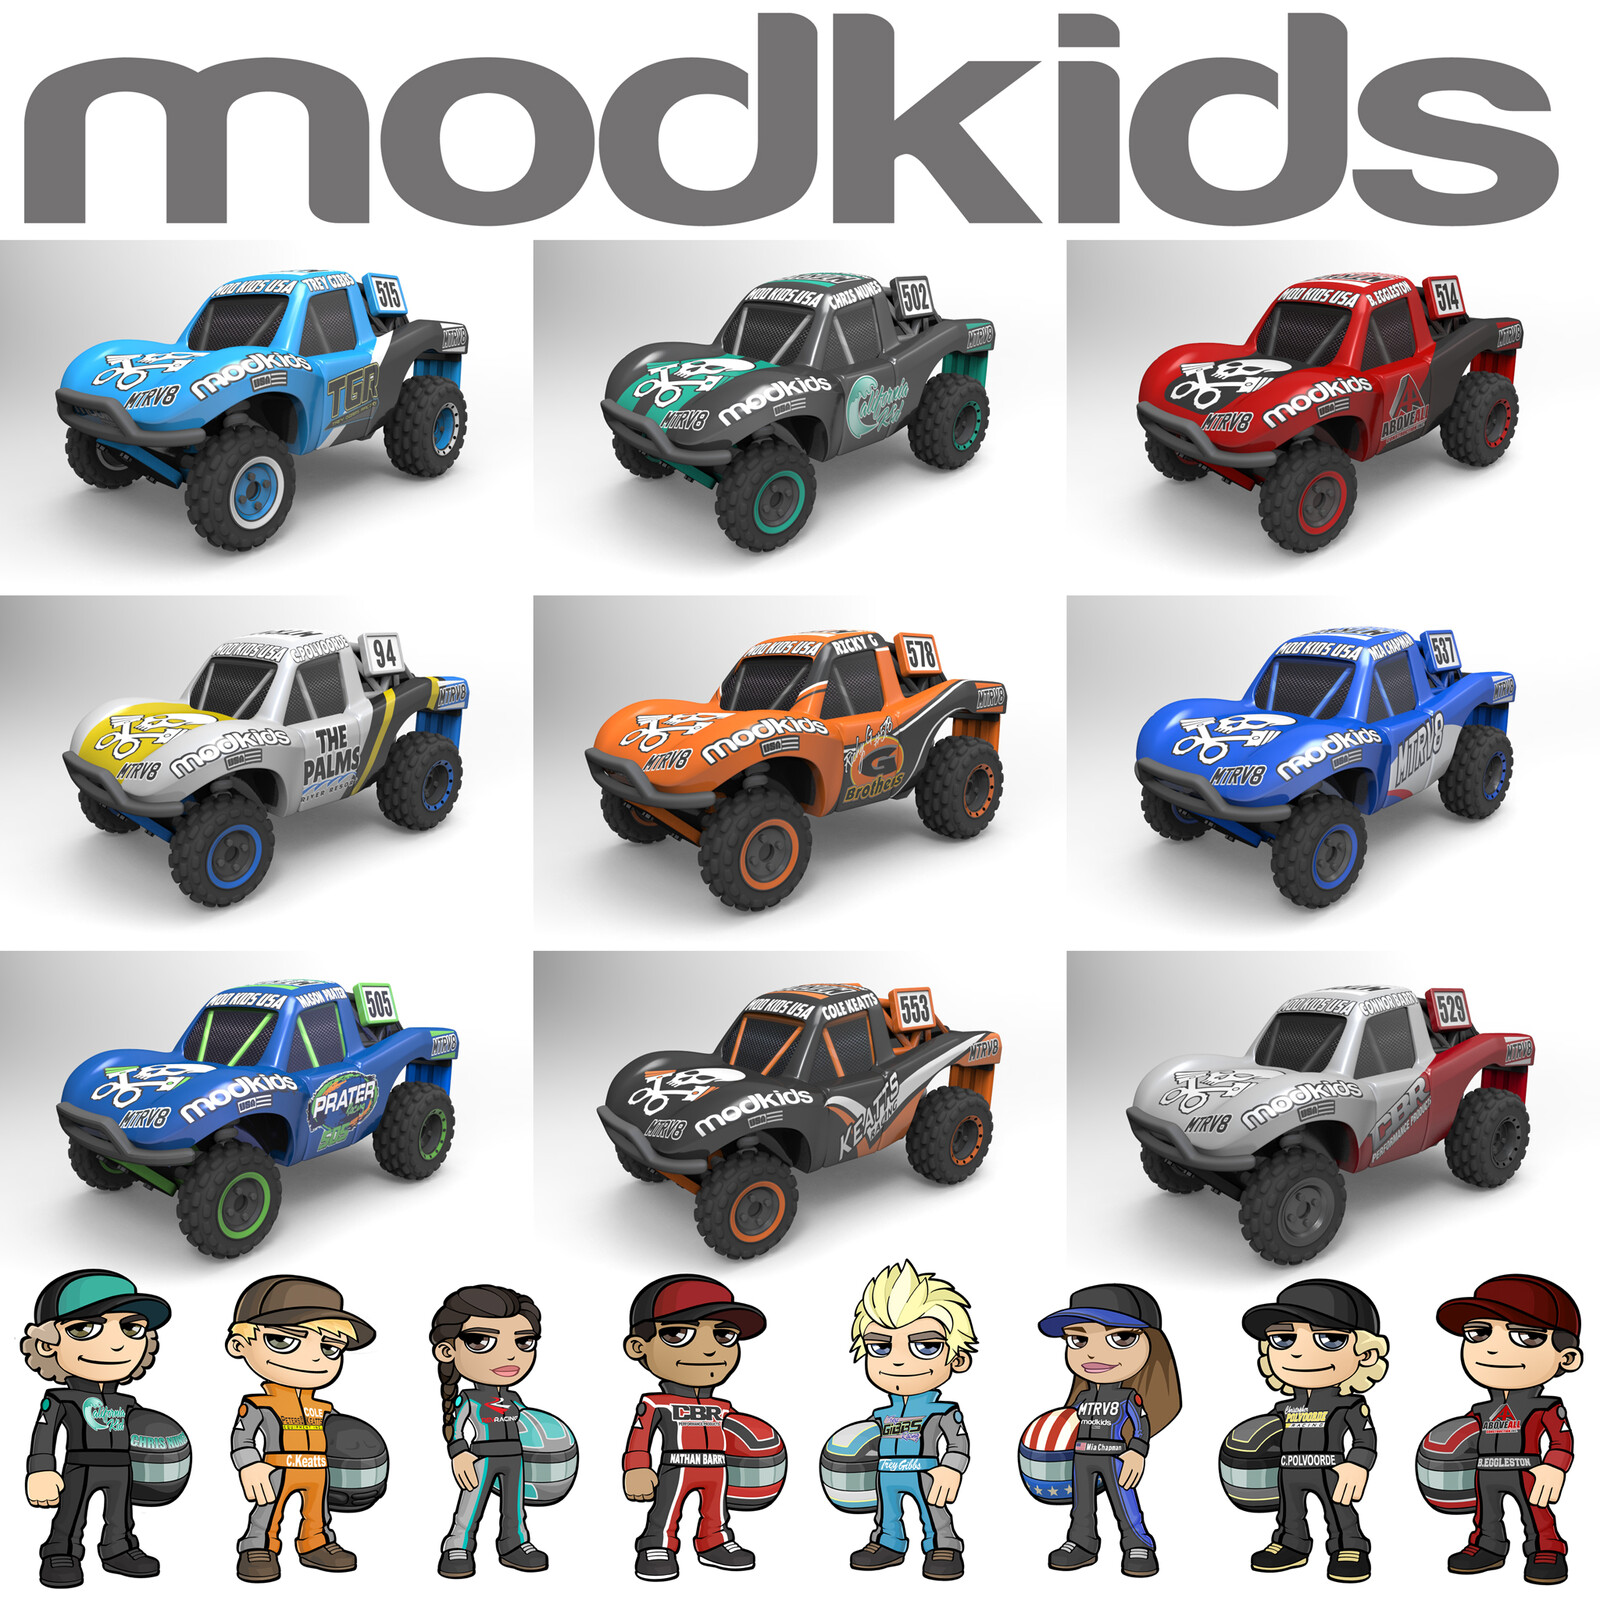 Designs for RC cars (with 2D Modkid Artwork)